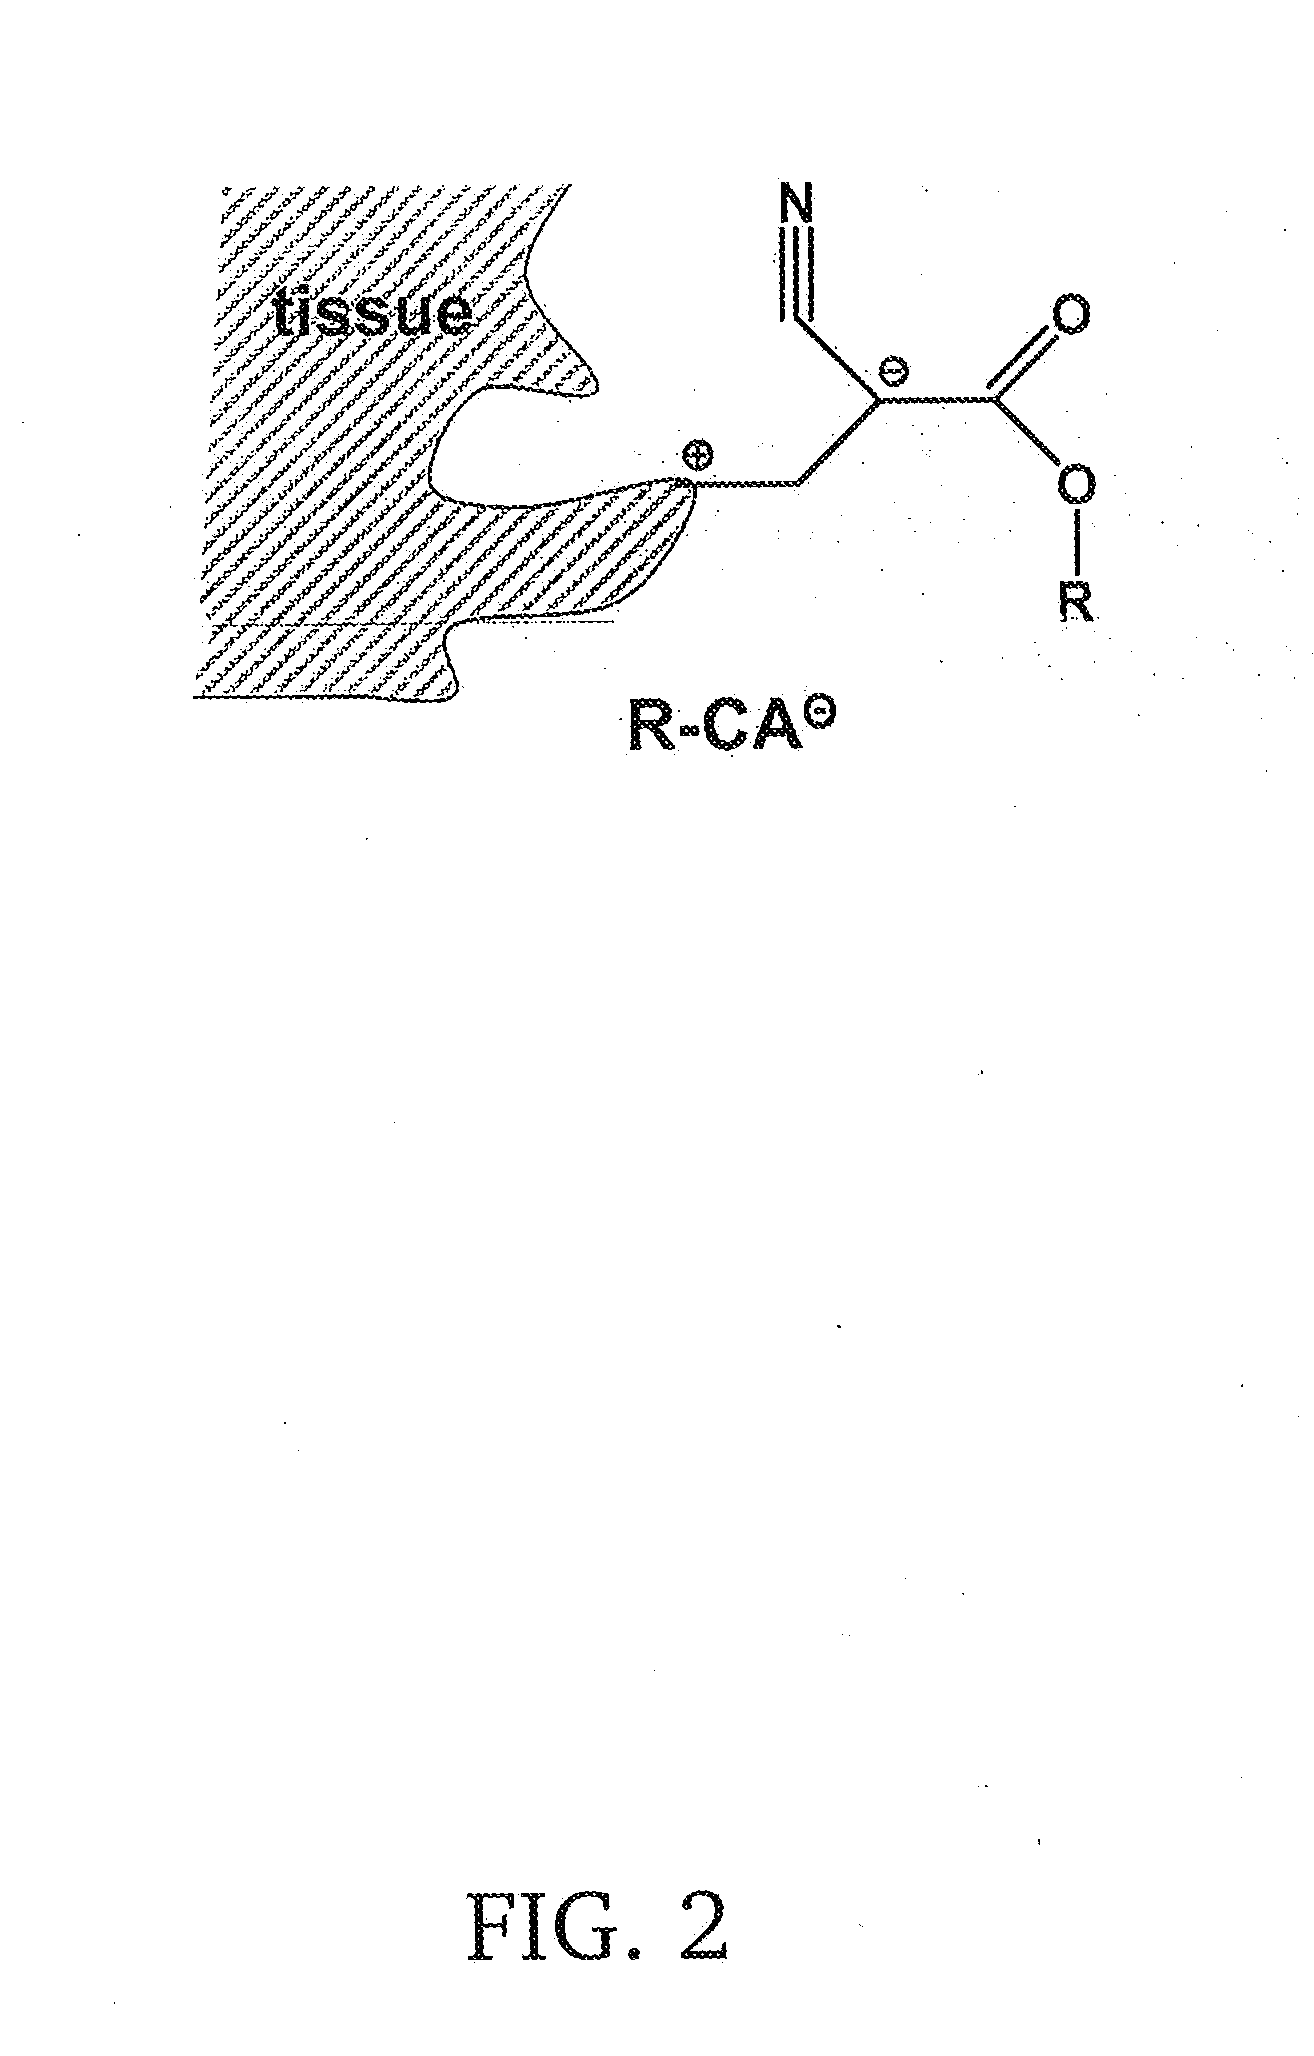 Poly(octylcyanoacrylate)-polyisobutylene polymer conetwork, method for the production thereof and uses thereof